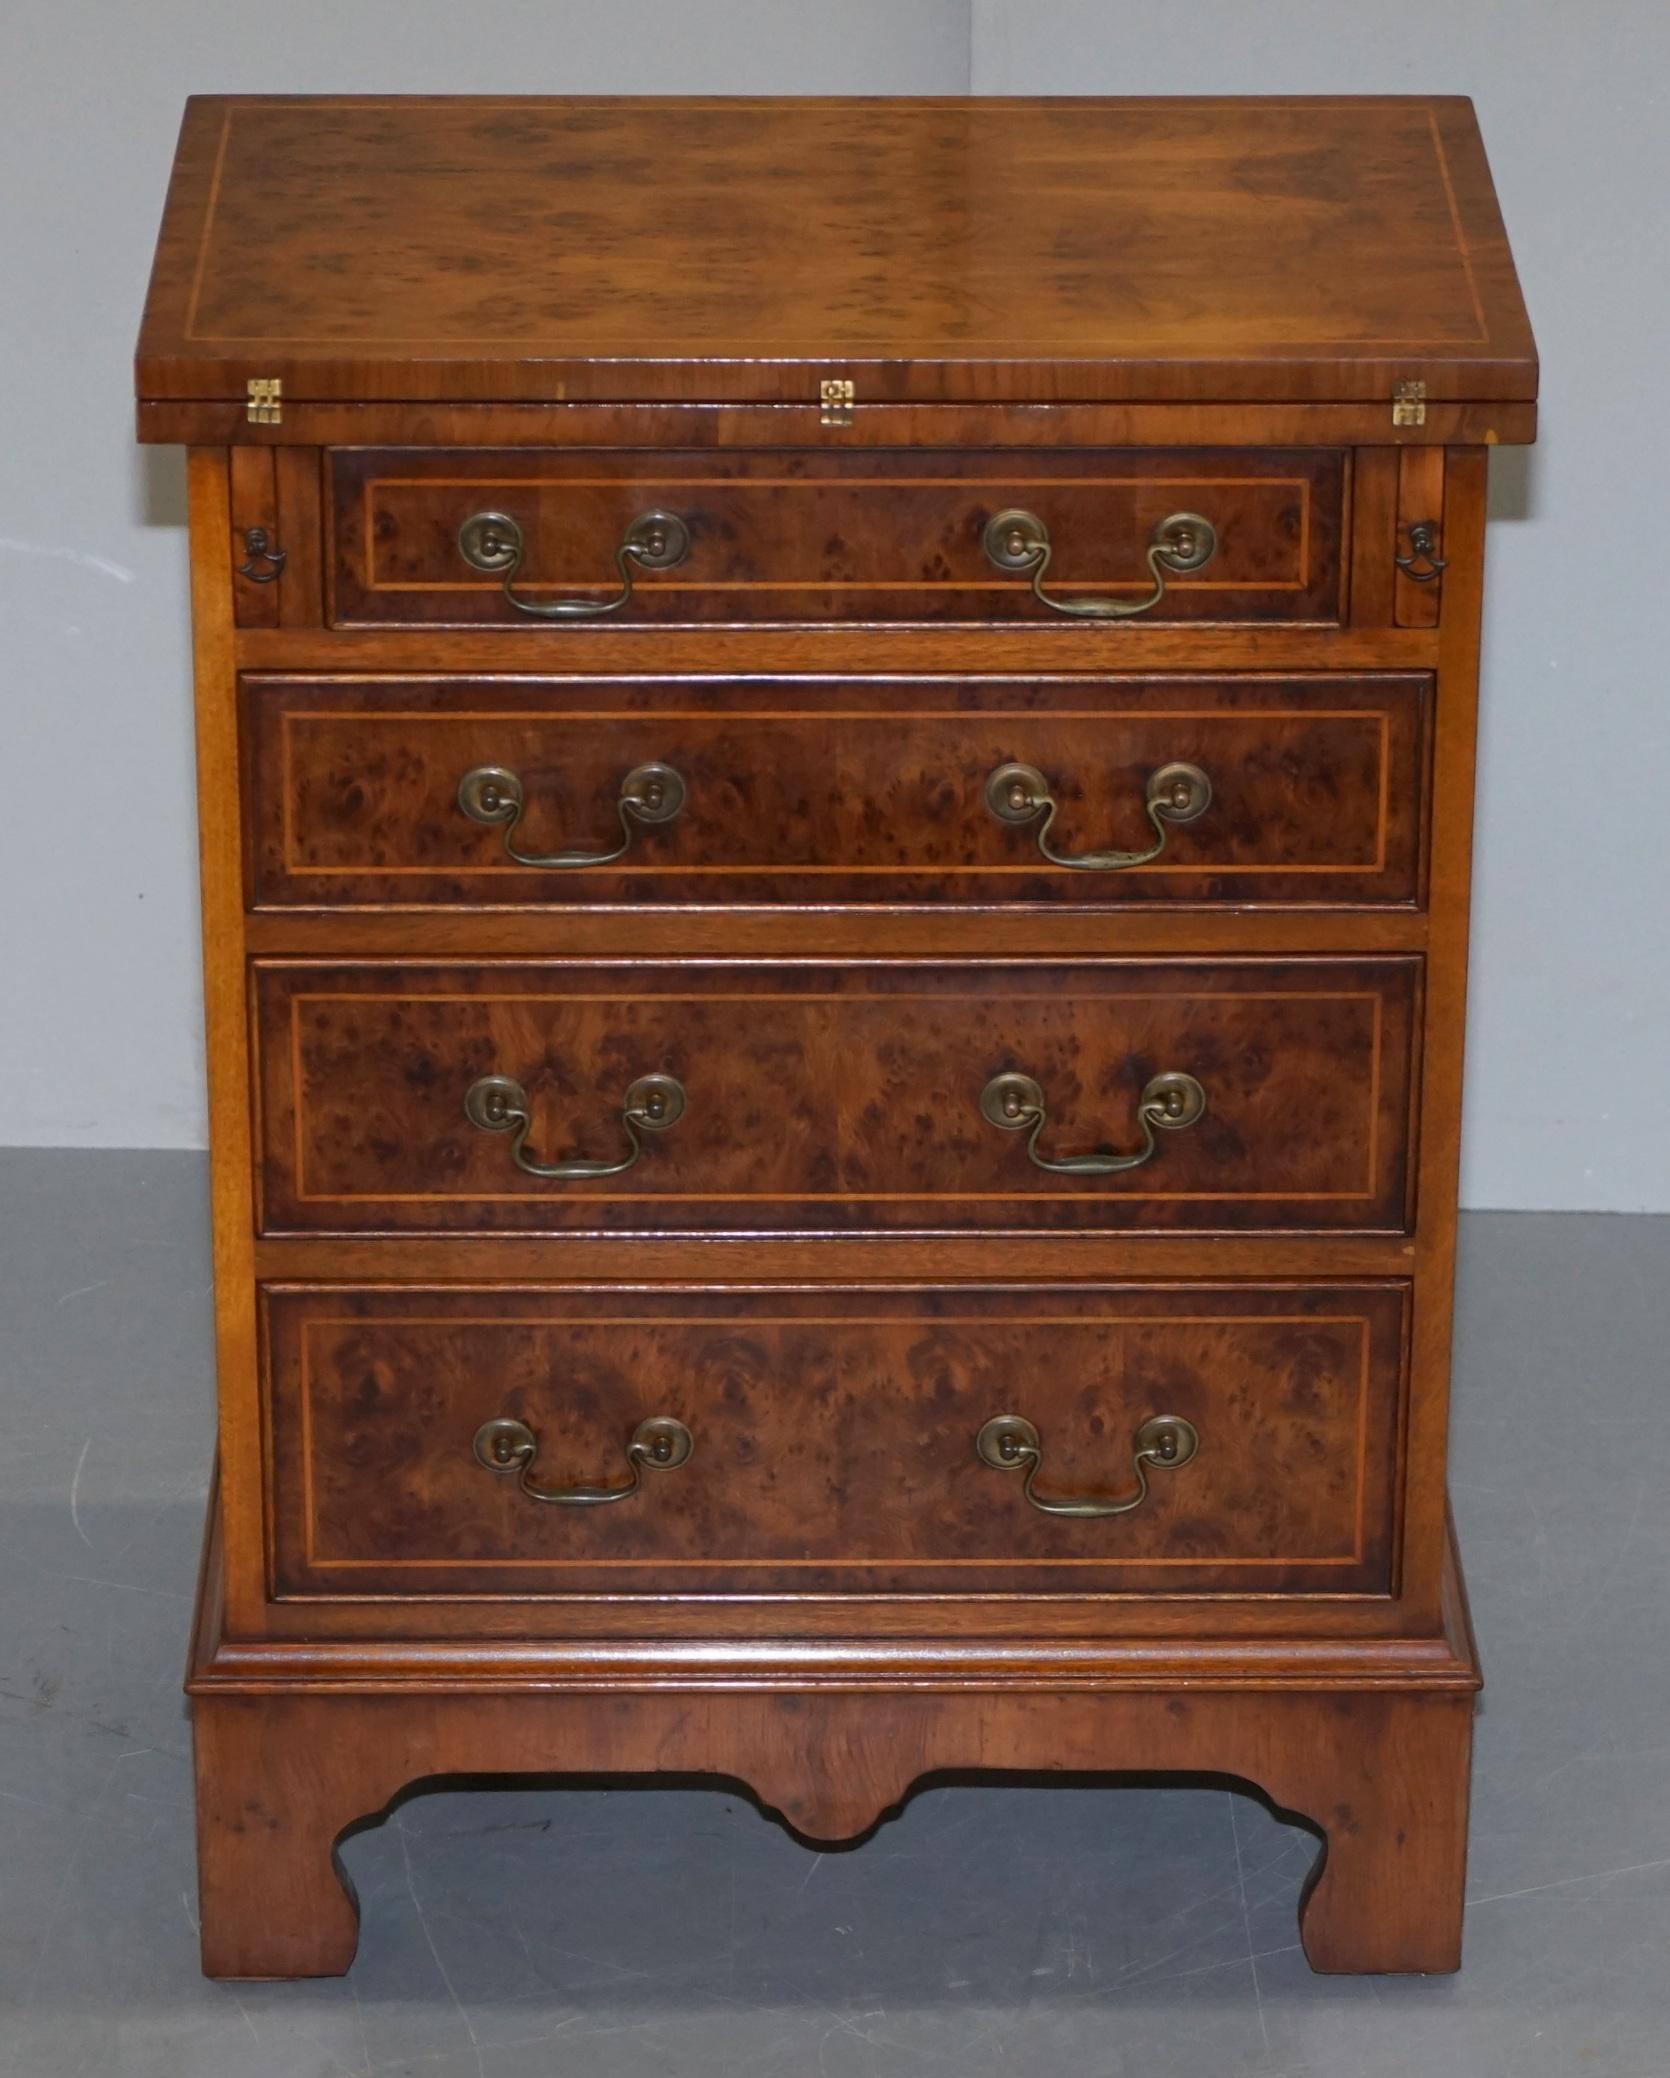 We are delighted to offer for sale this lovely vintage Bevan Funnell Burr walnut bachelors chest of drawers with folding butlers serving tray

A very good looking and well made chest of drawers with a folding butlers serving tray, it has burr